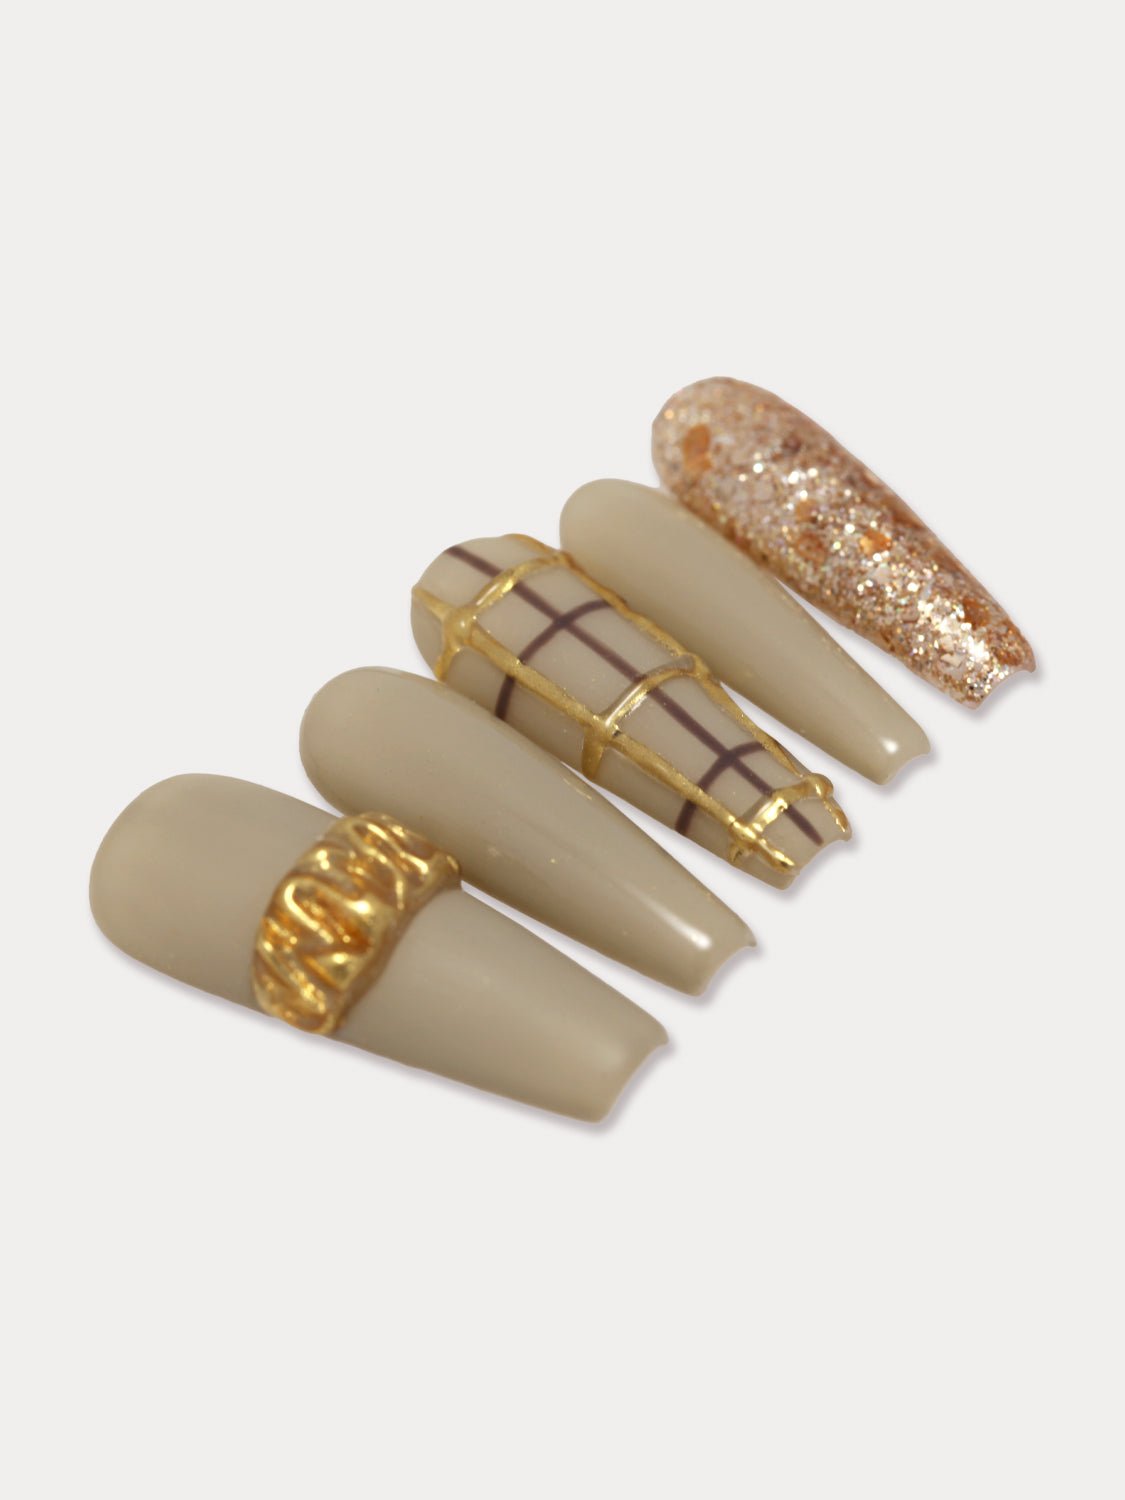 MIEAP Glitter Chrome Powder press on nail set features a specially curated base color in a unique gray-green shade, perfectly complemented by the dazzling gold glitter. The highlight of the design is the 3D ring-shaped design with gold chrome powder. #MIEAP #MIEAPnails #pressonnail #falsenail #acrylicnail #nails #nailart #naildesign #nailinspo #handmadenail #summernail #autumnnail #nail2023 #graduationnail #glitternail #3Dnail